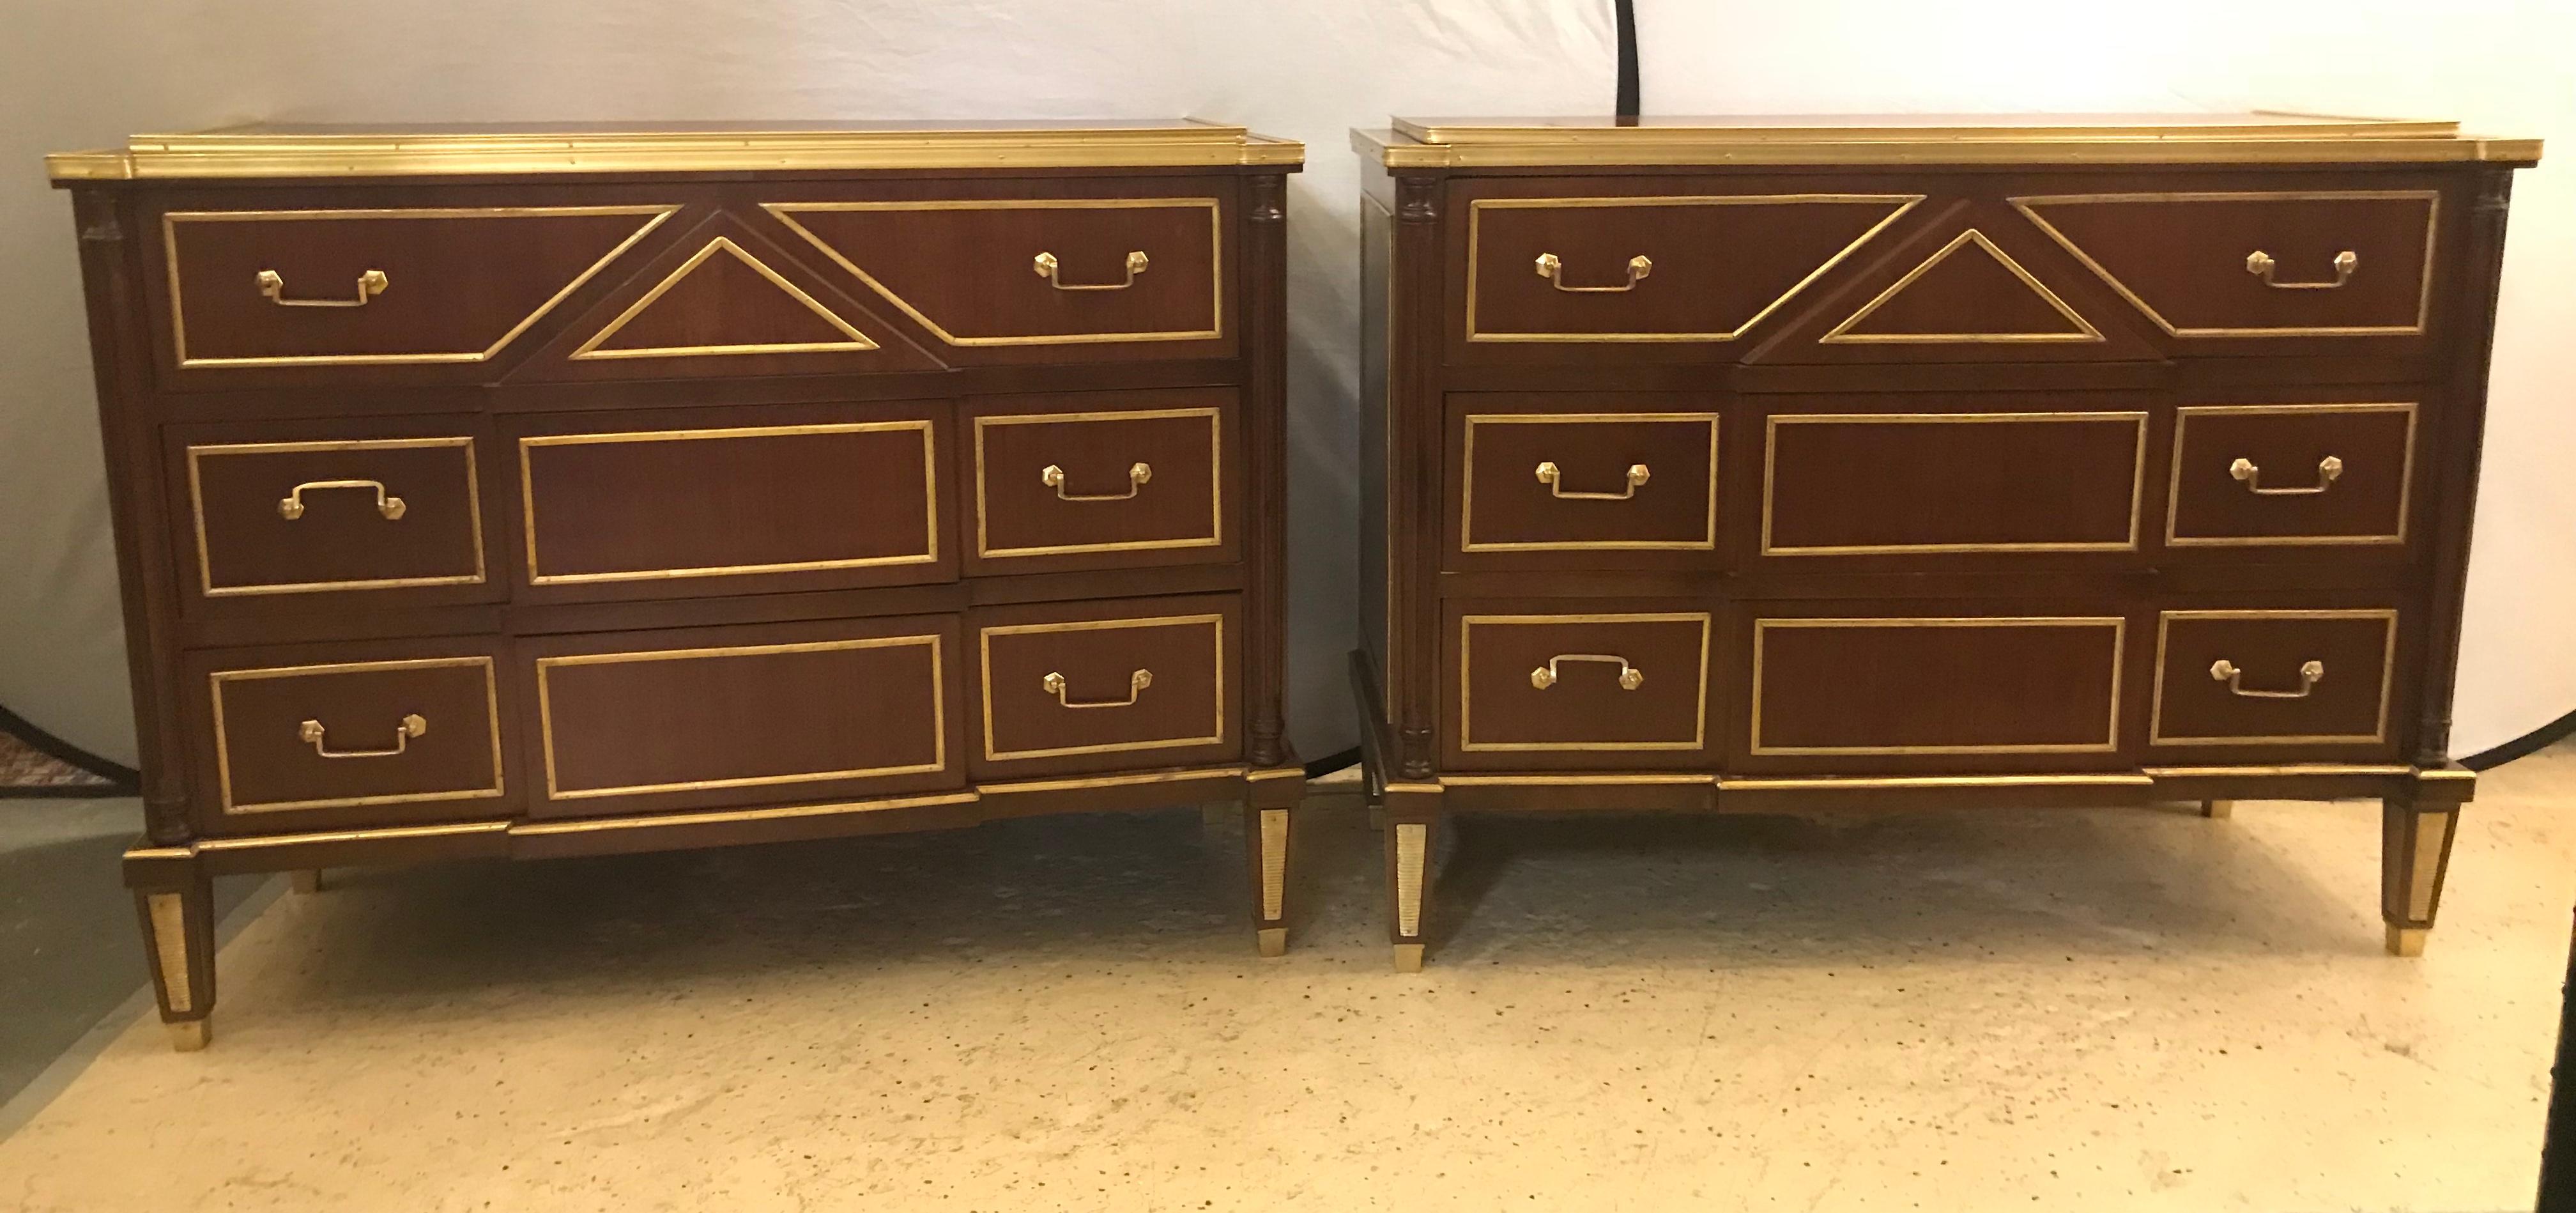 A pair of Russian neoclassical style commodes / bedside nightstands or servers. Stunning and showy are these fine three drawer wonderfully bronze mounted step up commodes or end tables. The bronze sabots tapering legs having reeded cookie cutter